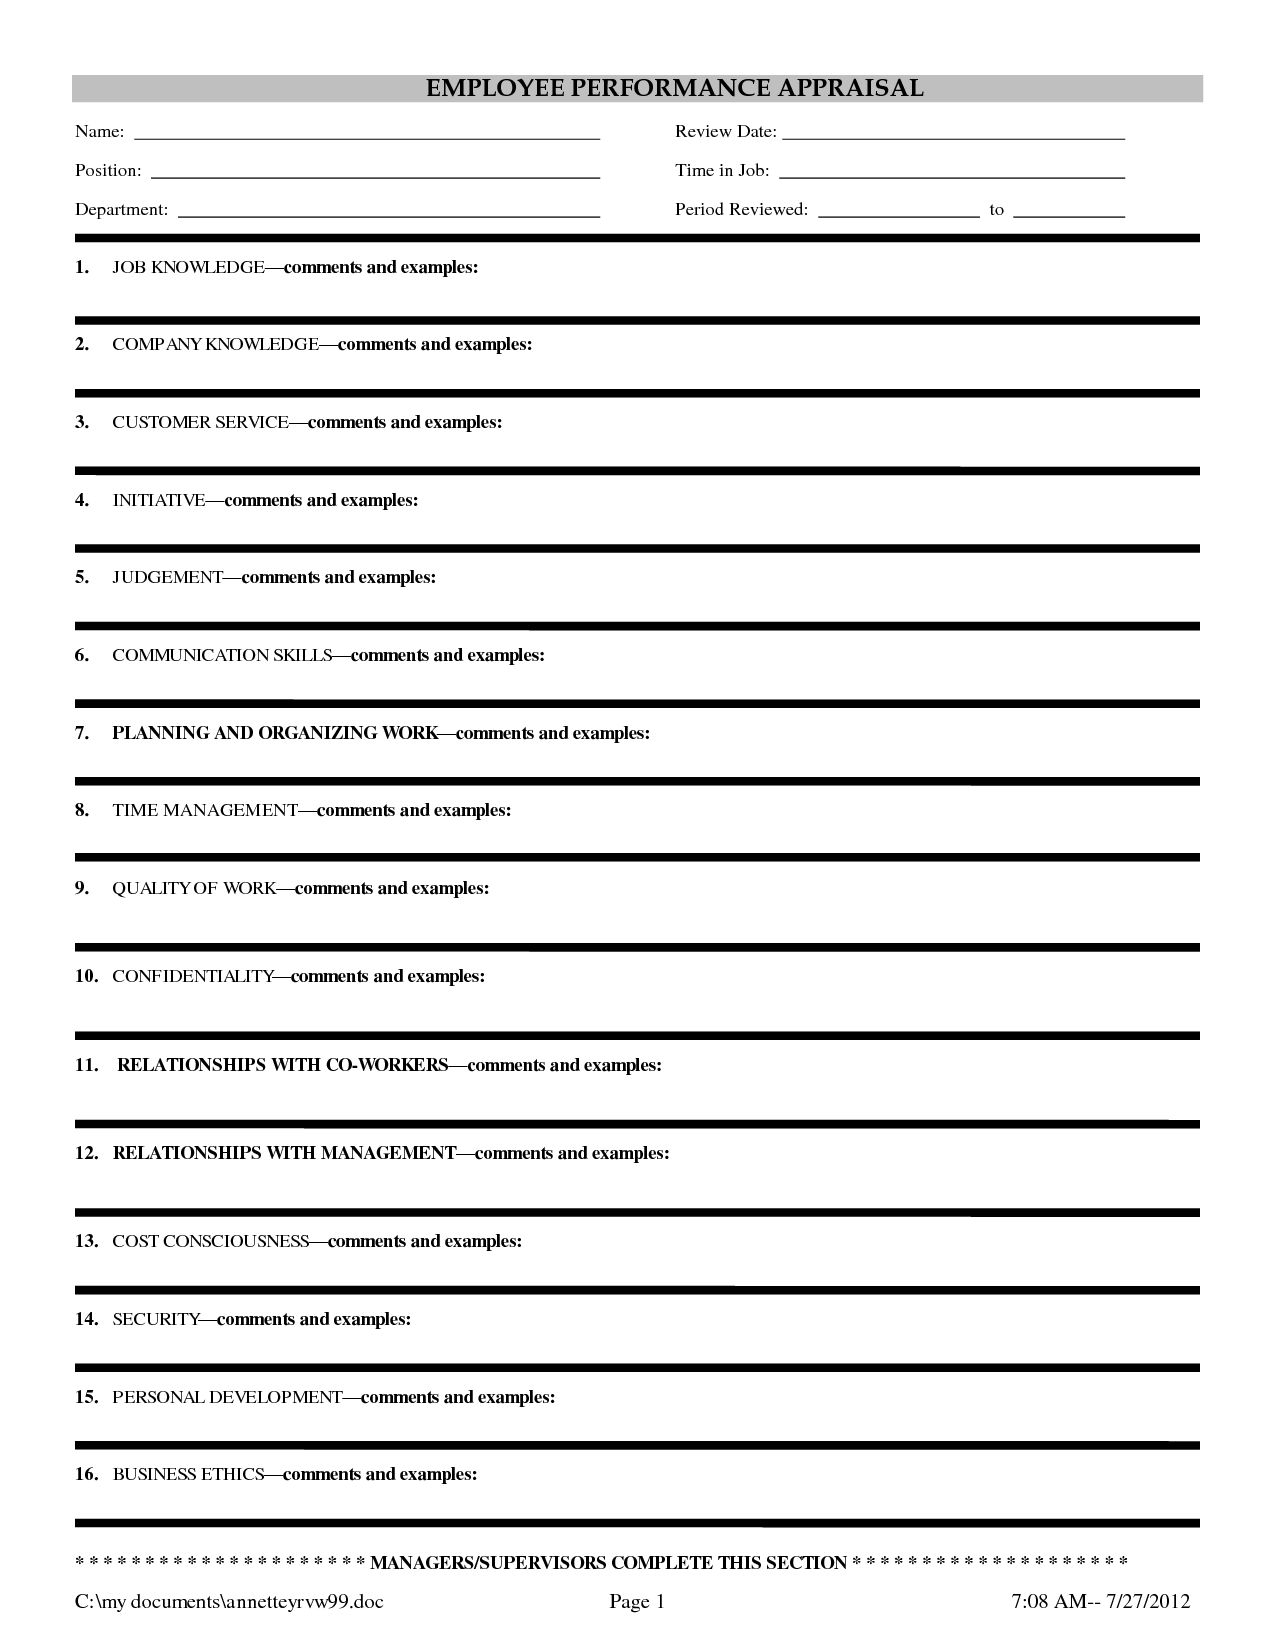 23 Images Of Evaluation Outline Template Blank | Masorler Within Blank Evaluation Form Template